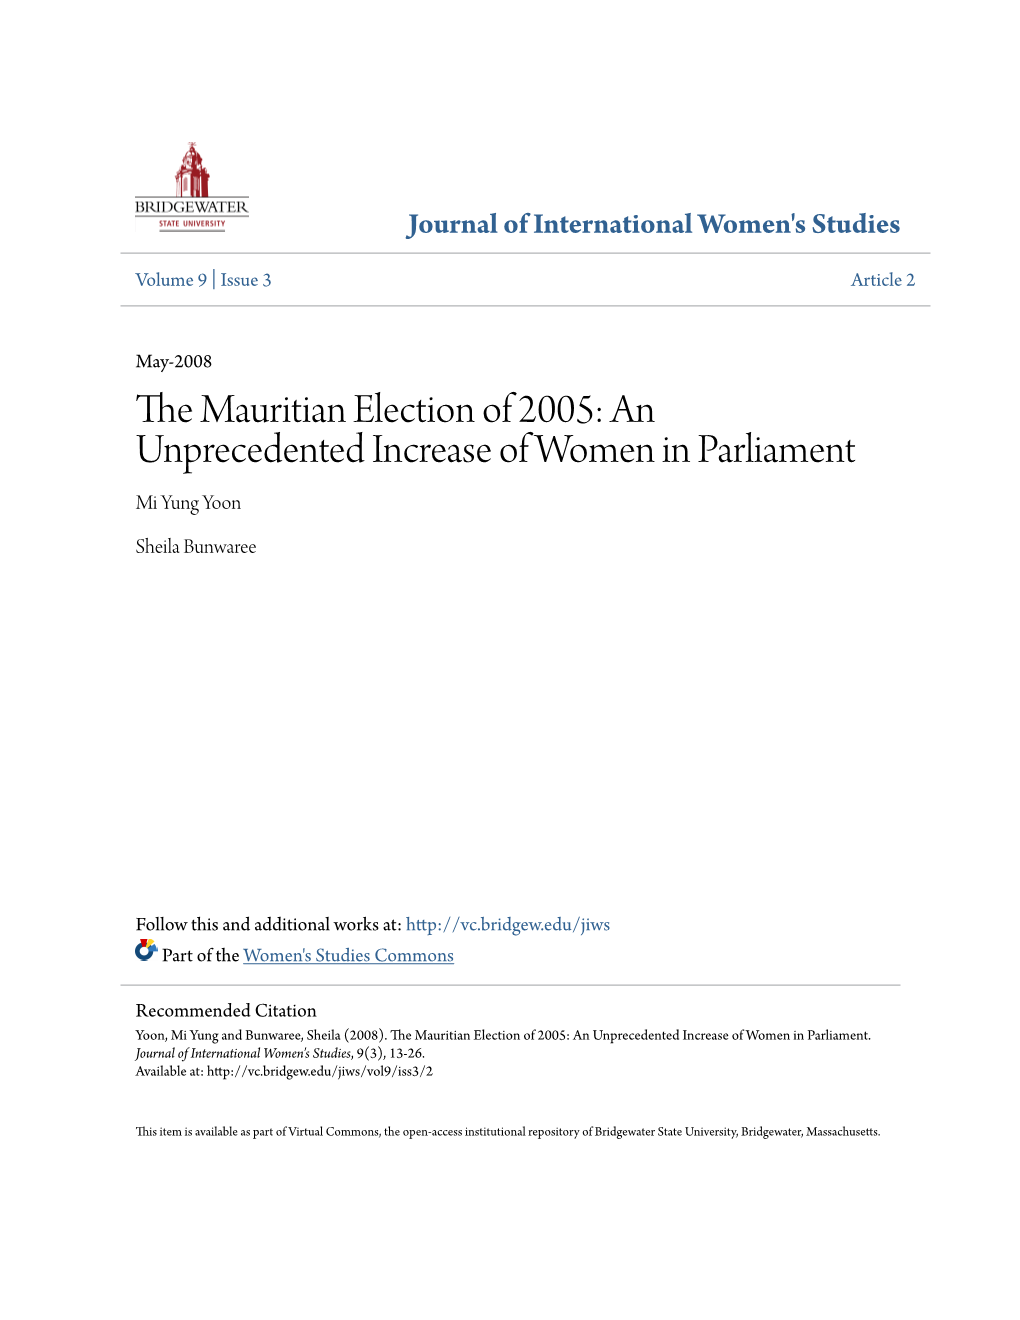 The Mauritian Election of 2005: an Unprecedented Increase of Women in Parliament